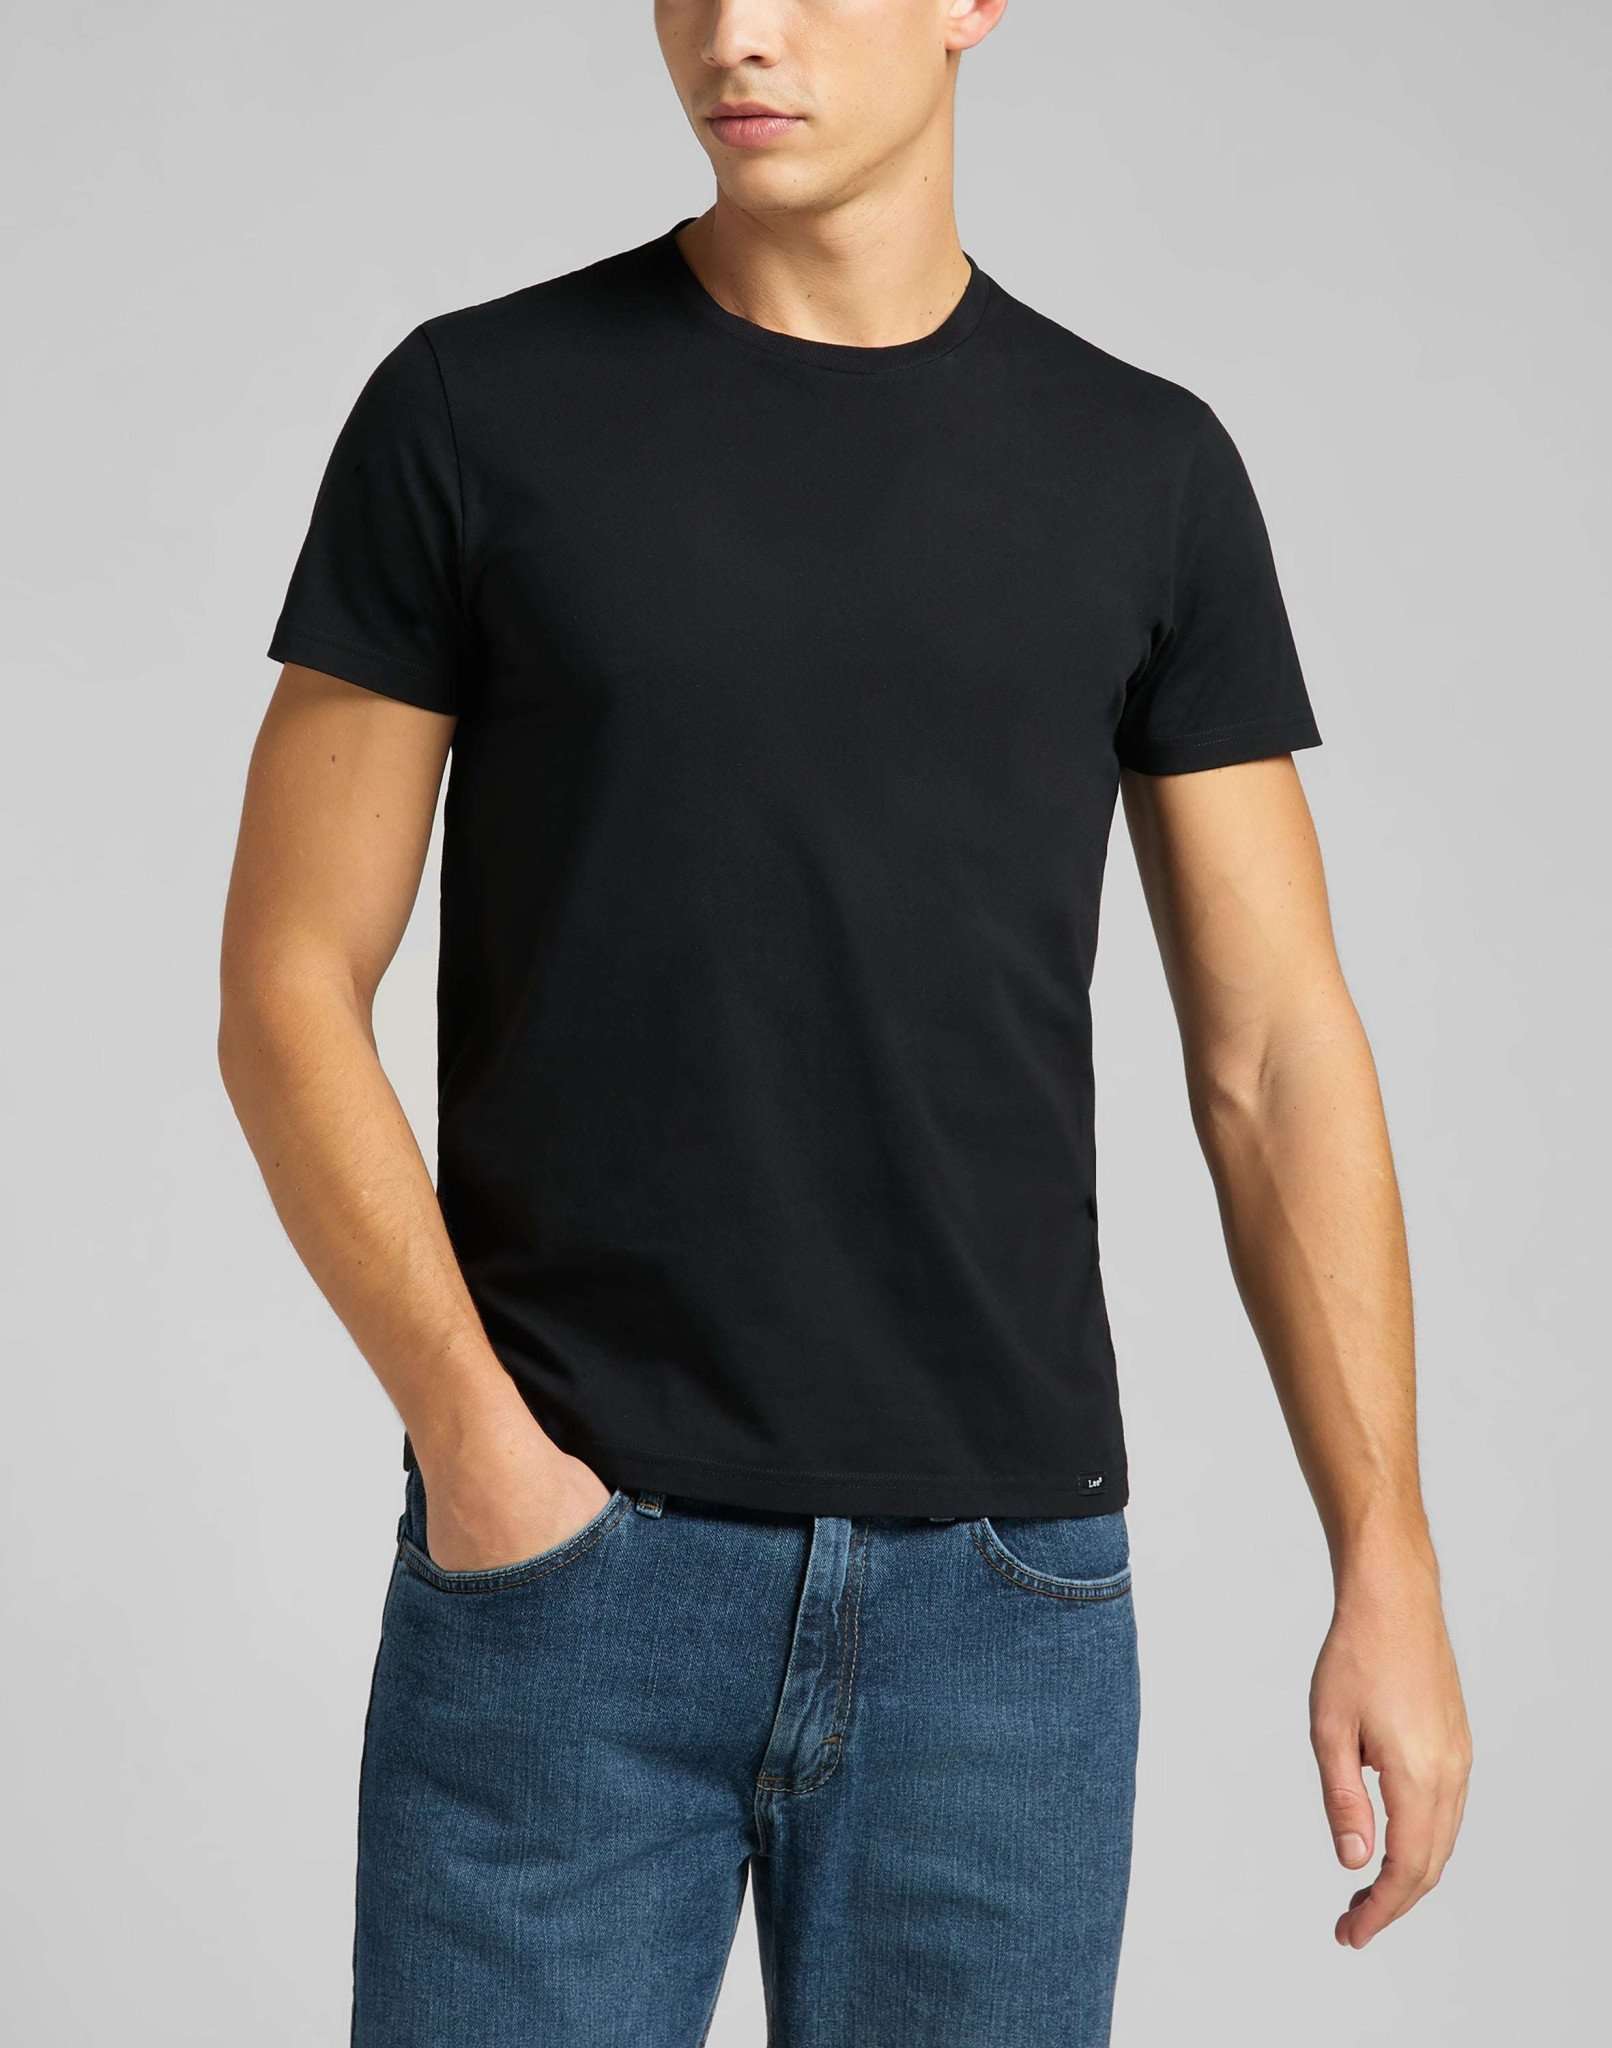 Twin Pack Crew Tee in Black T-Shirts Lee   